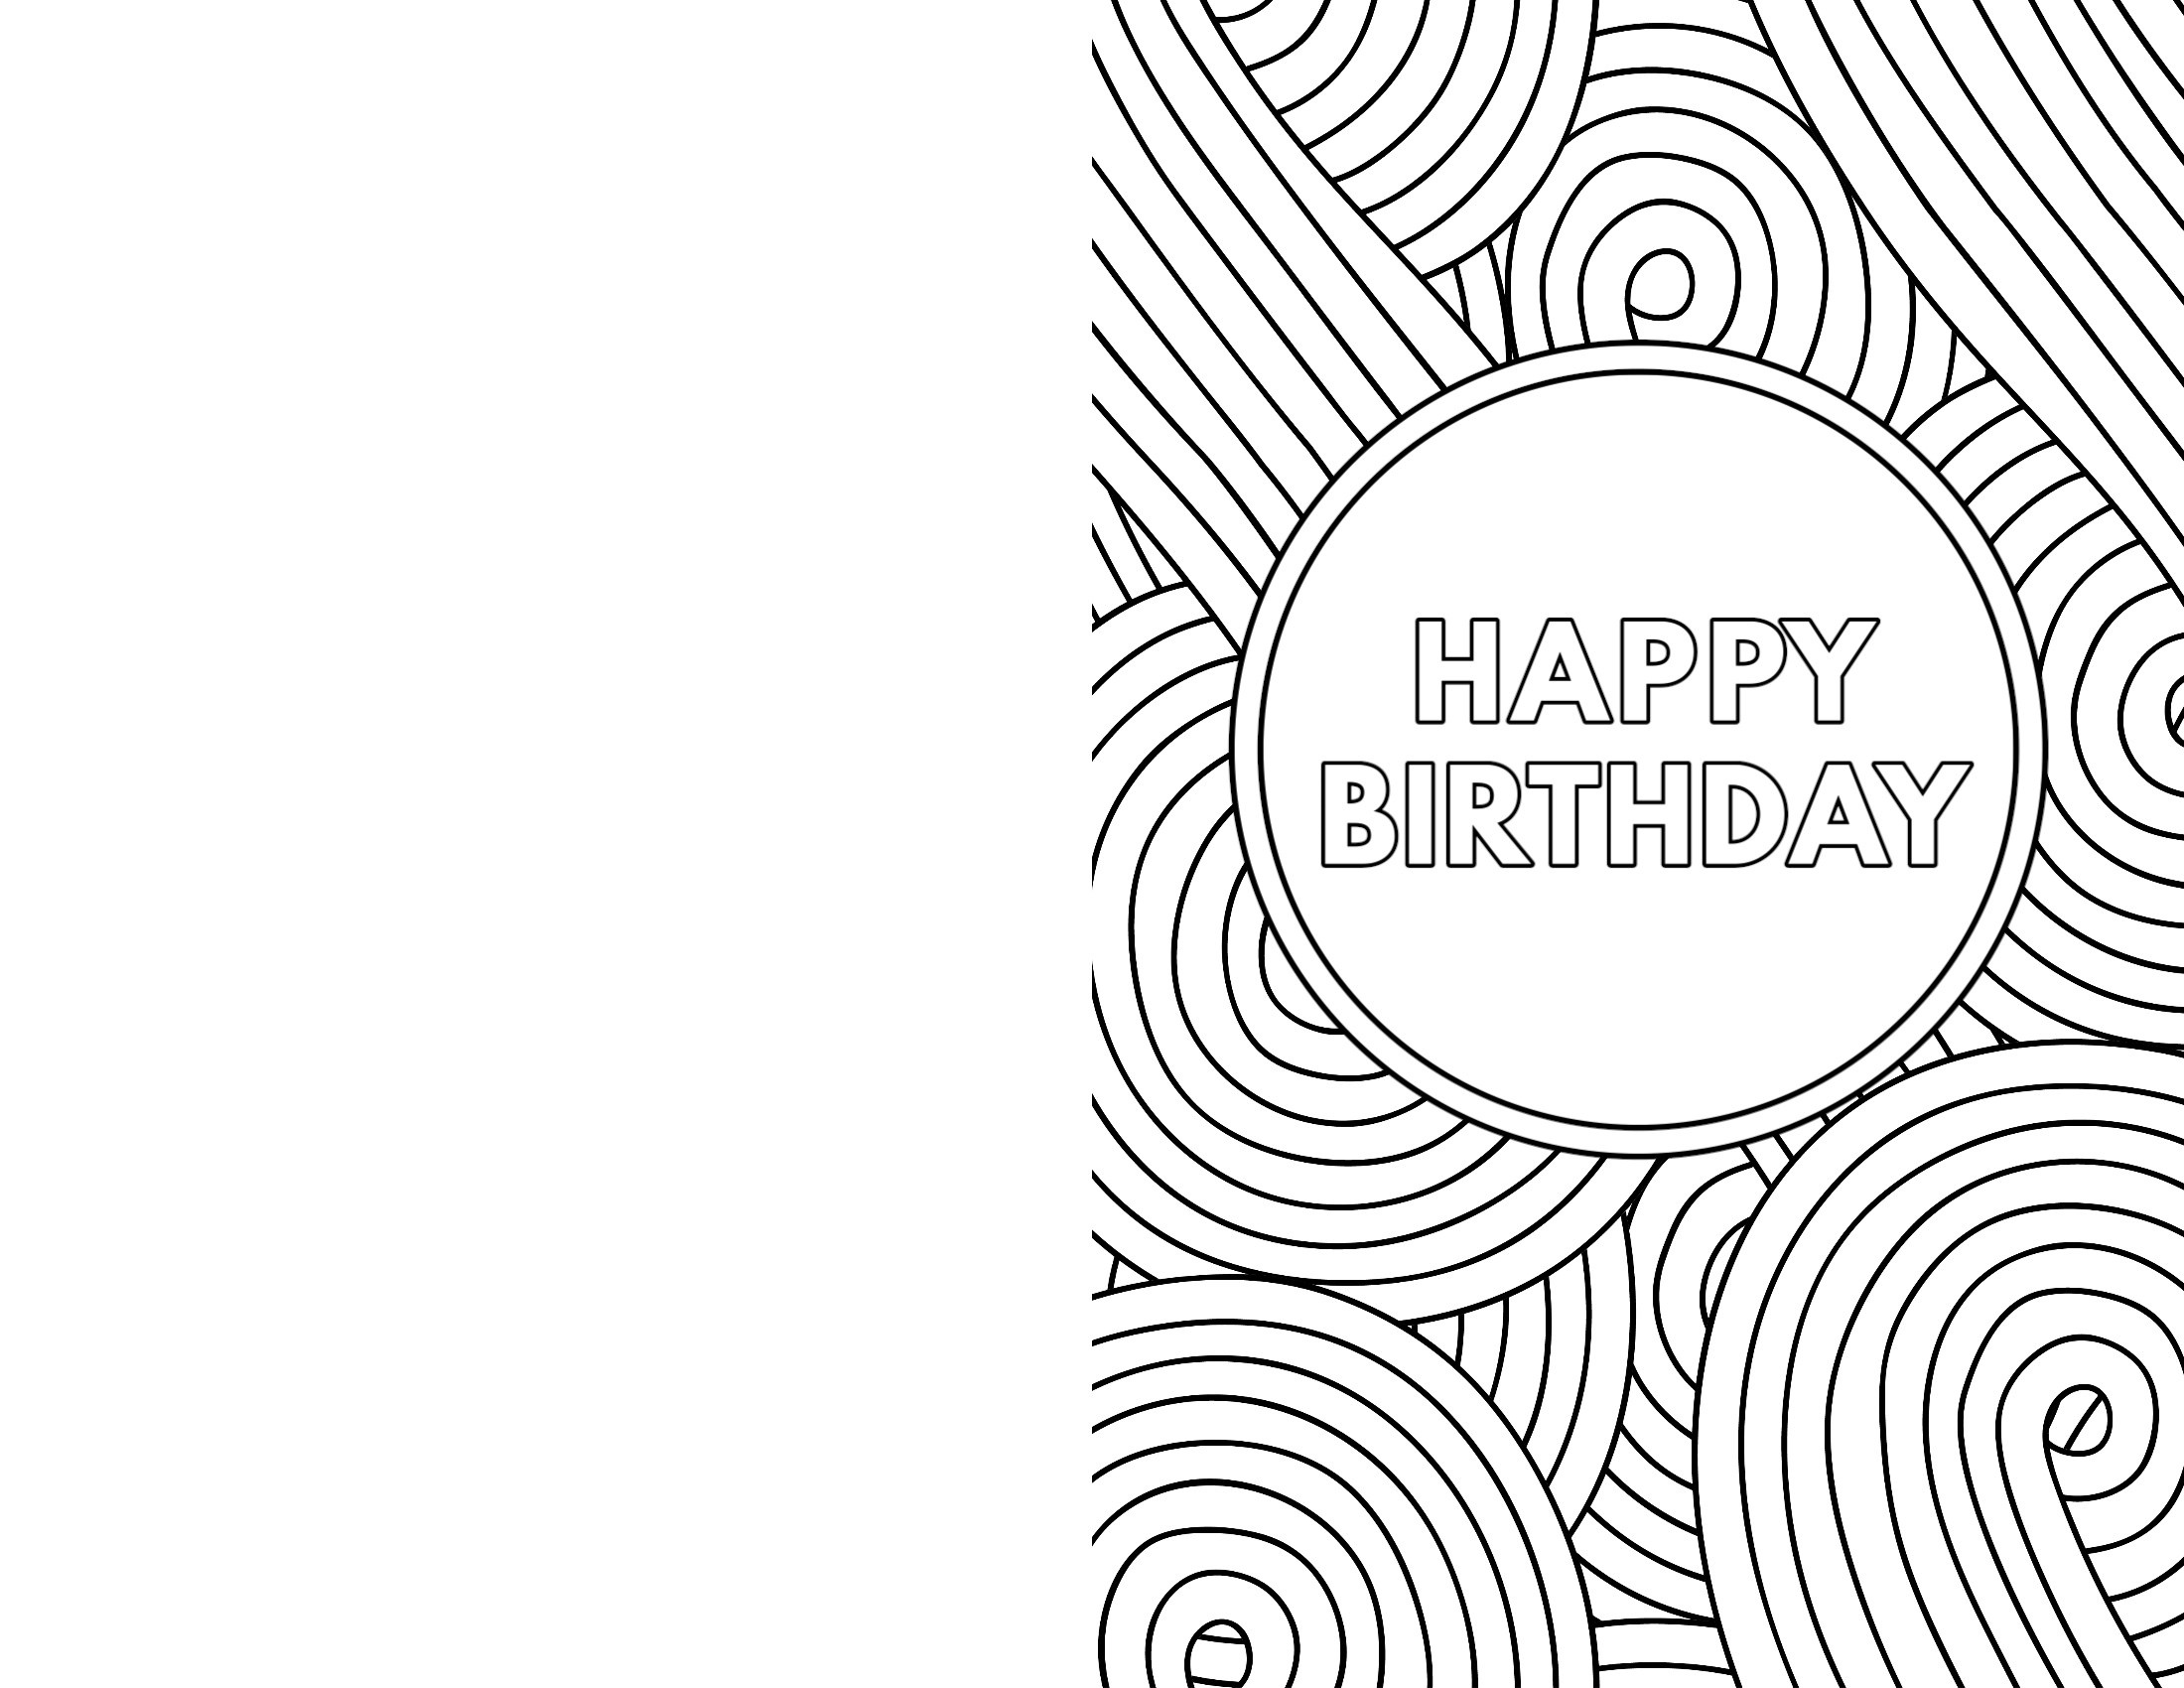 Free Printable Birthday Cards - Paper Trail Design - Free Printable Birthday Cards For Boys